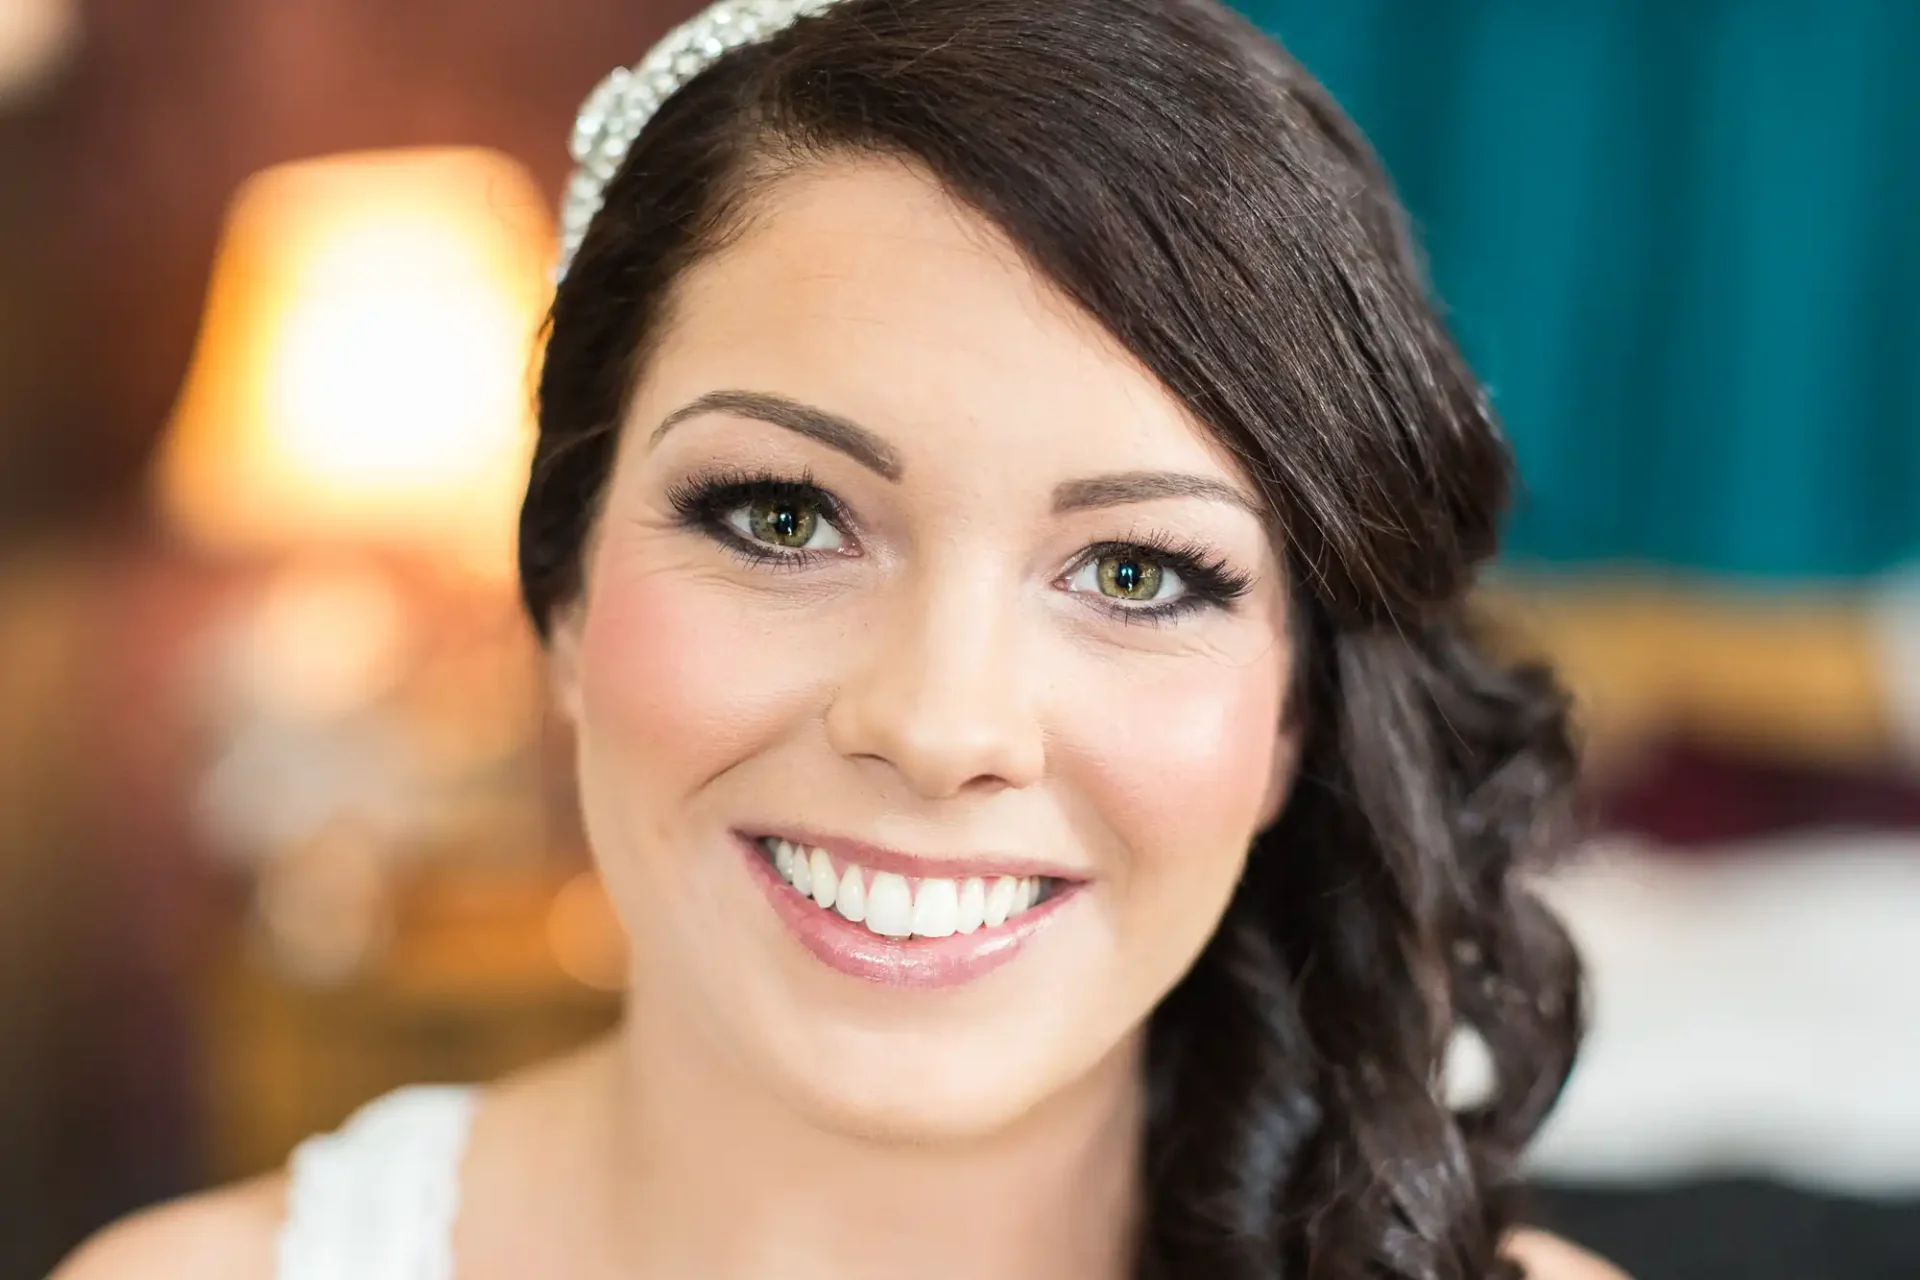 Close-up of a smiling bride with dark hair, wearing a tiara, elegant makeup, and earrings, in a warmly lit room.